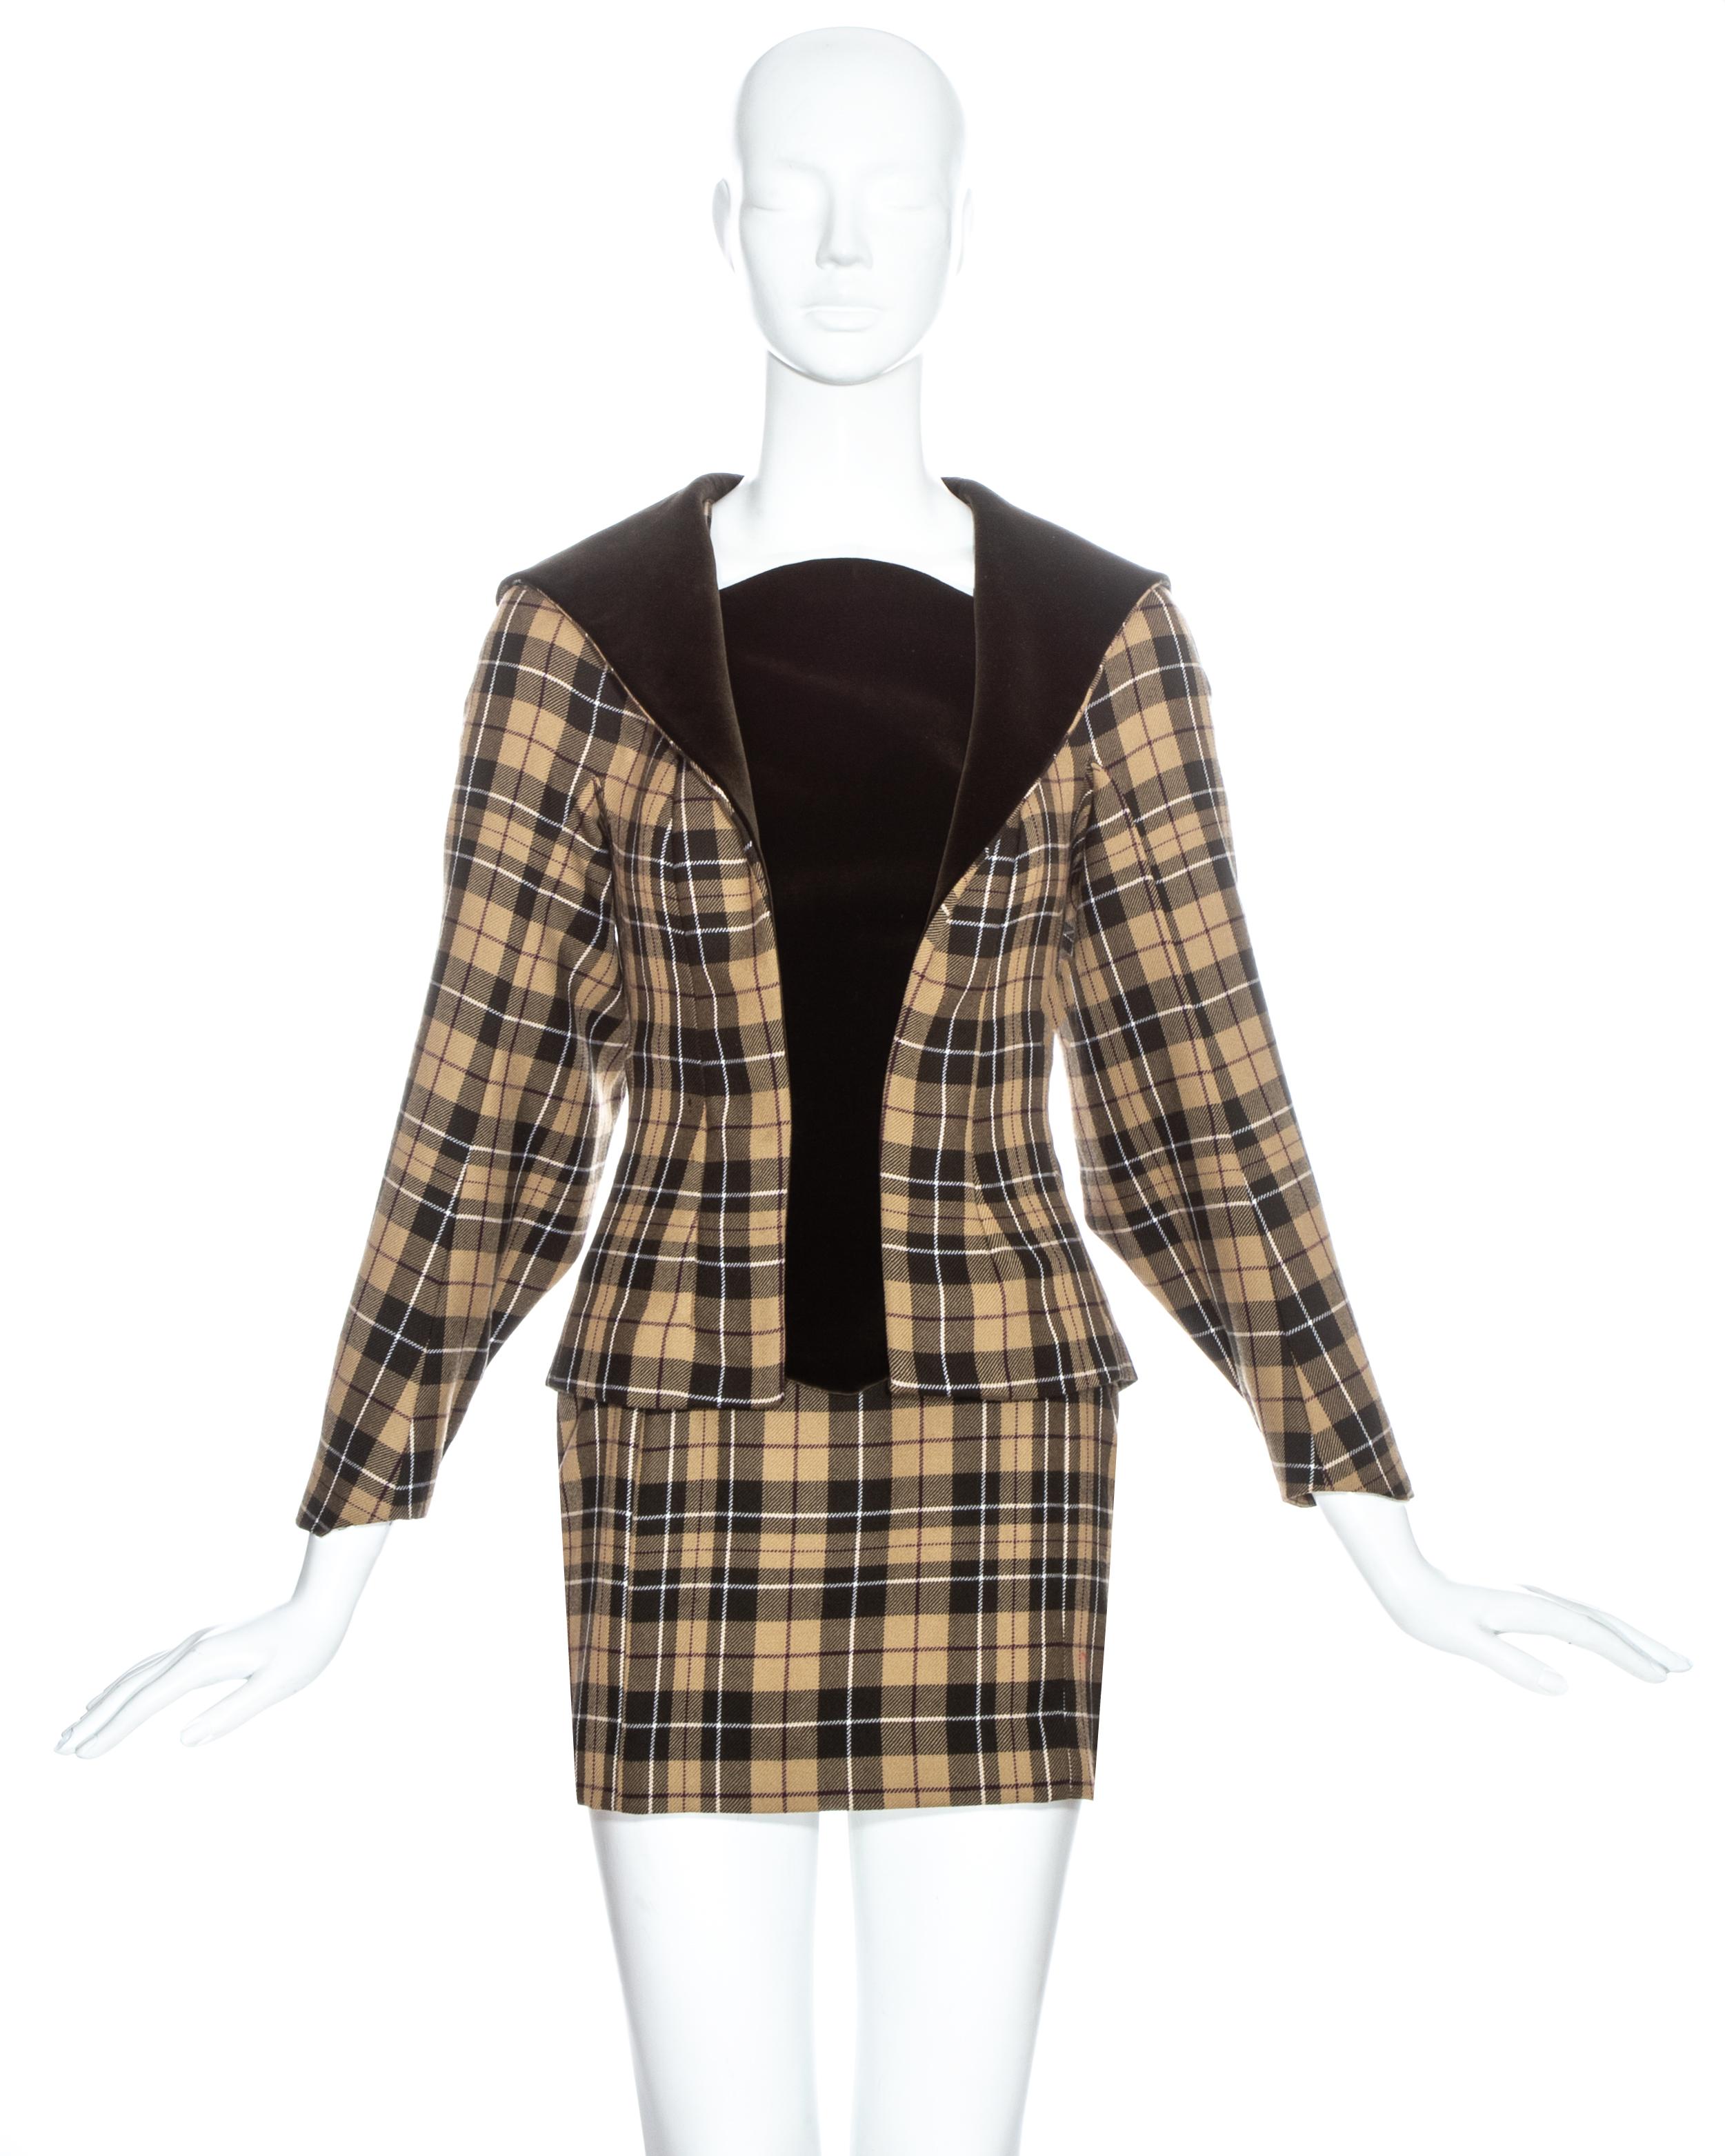 Vivienne Westwood brown tartan wool and velvet suit comprising: blazer jacket with leg of mutton sleeve, gold orb button fastenings at the back and velvet bodice, and matching mini skirt.

Fall-Winter 1997